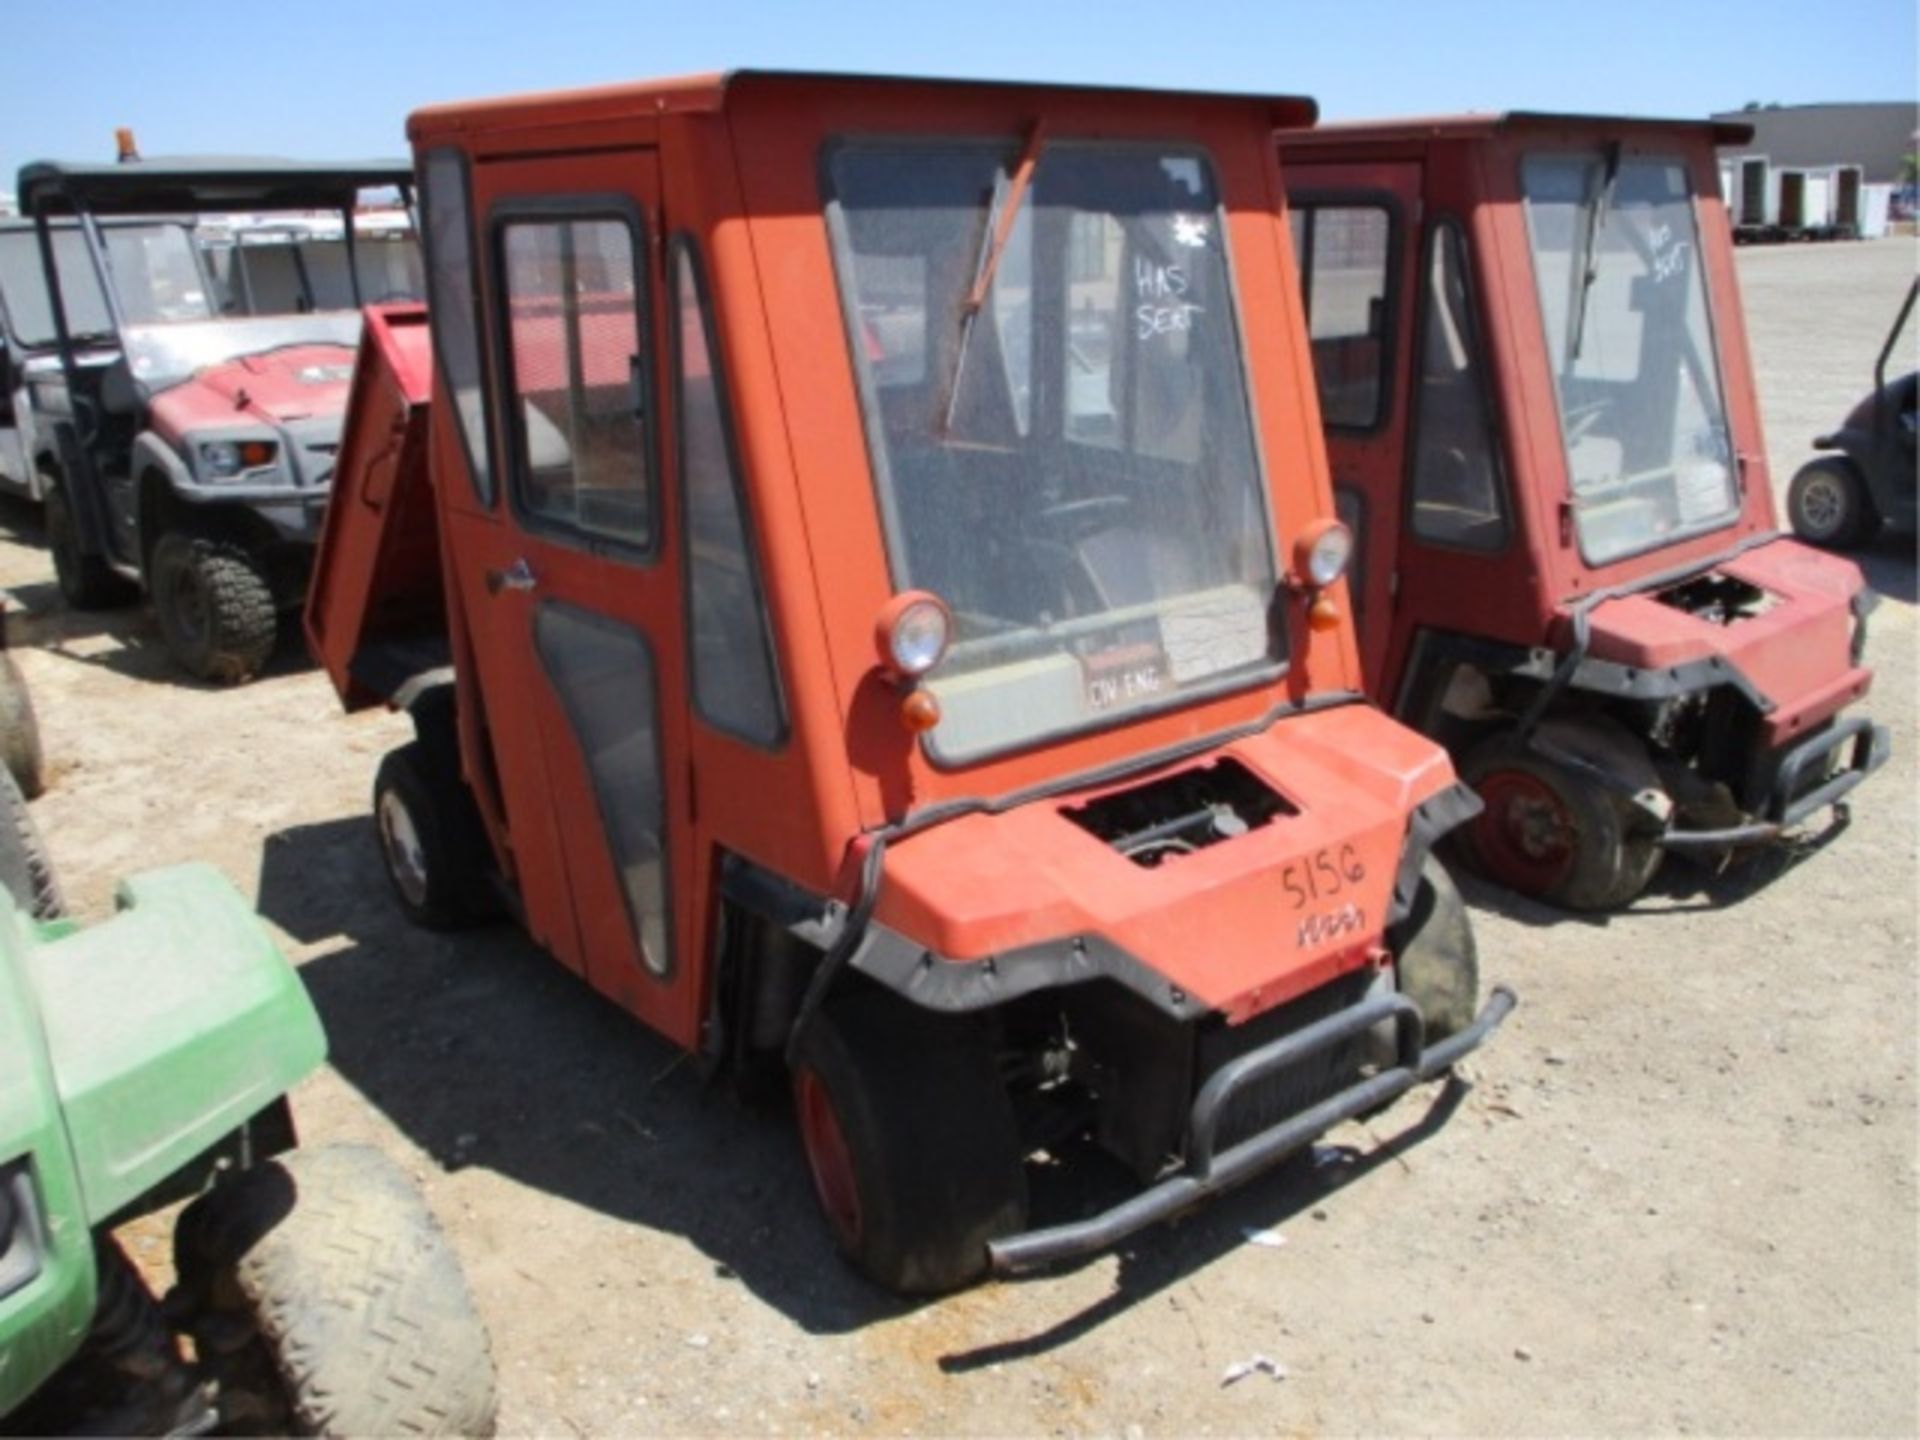 Kawasaki AF450 Utility Cart, Gas, Rear Dump Bed, Canopy, **Non-Operational**, Mile/Hours - 9587 - Image 5 of 36